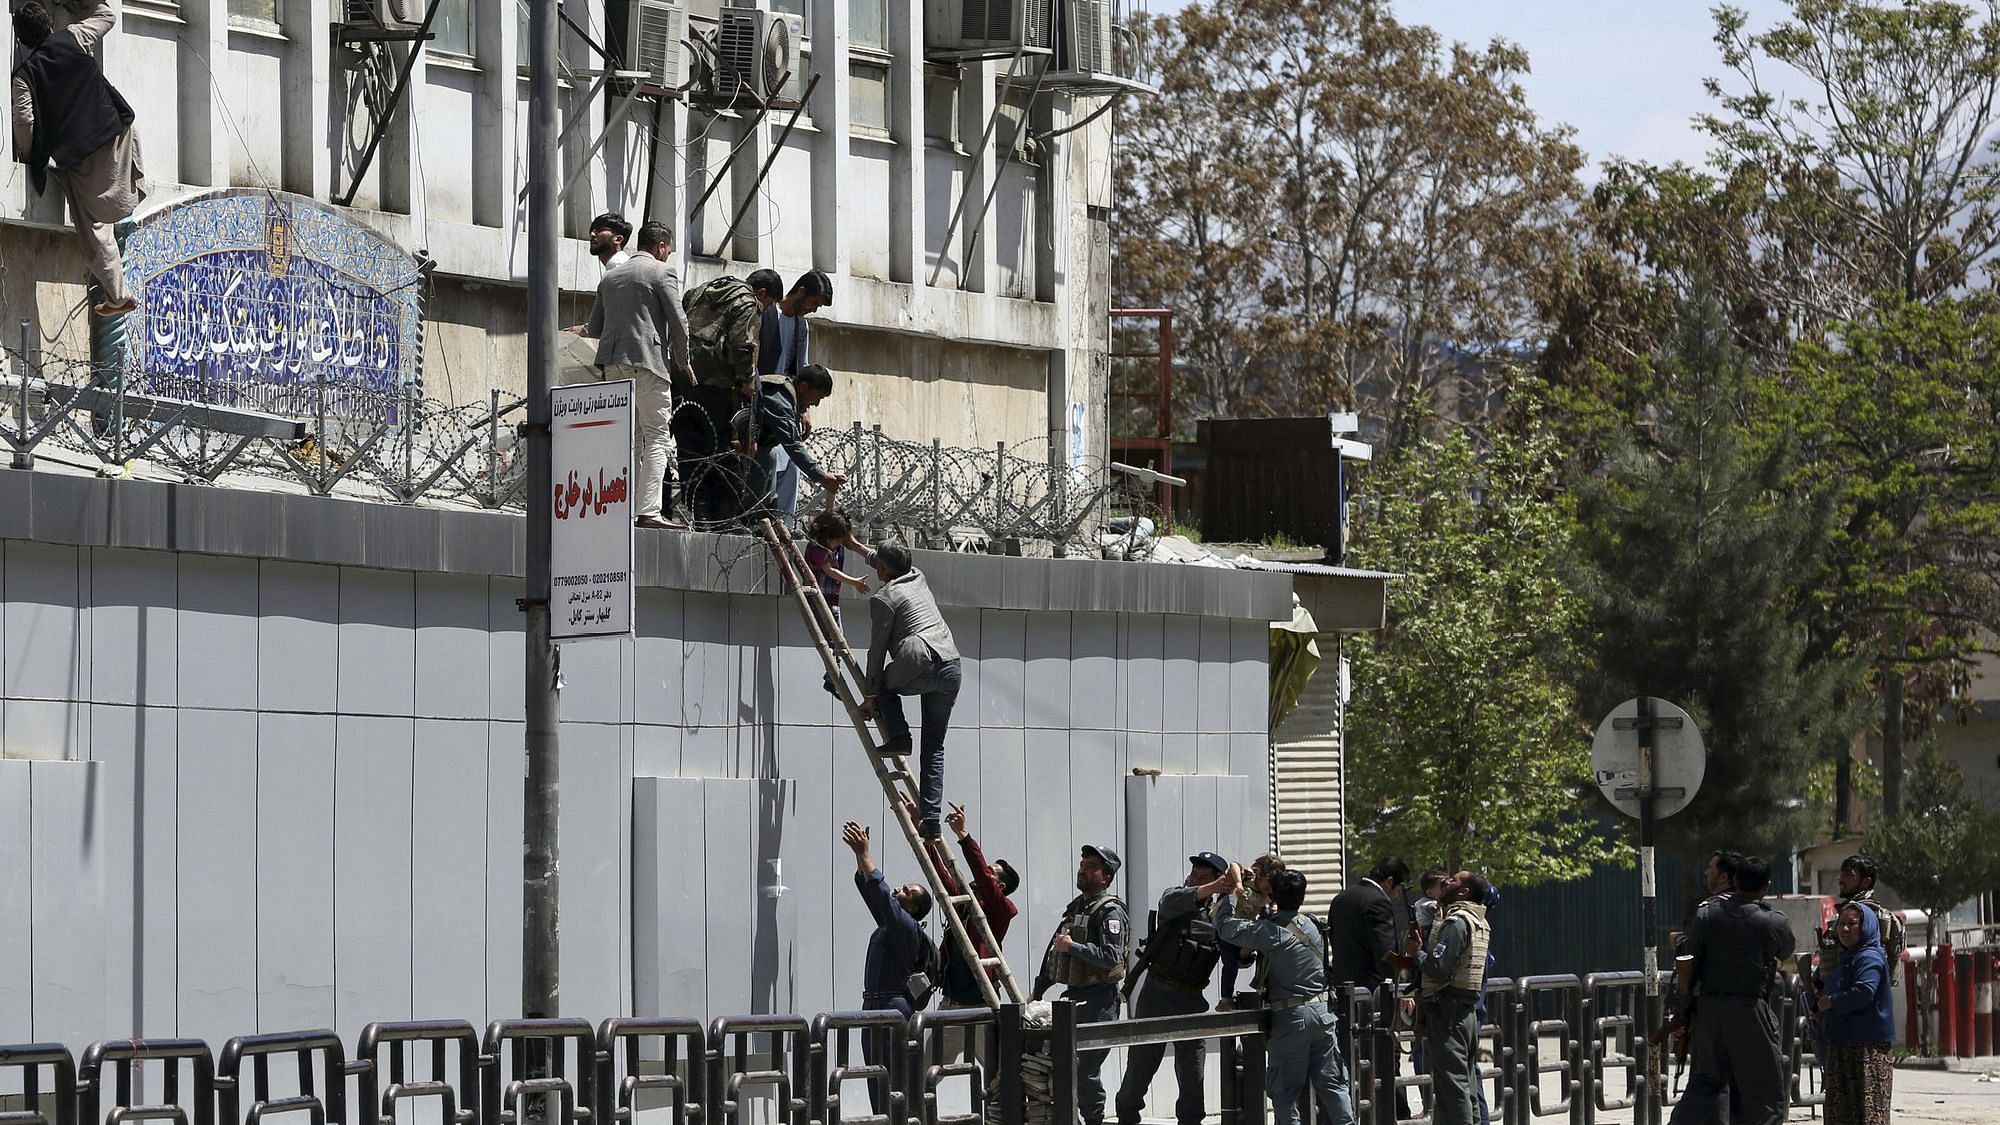 Afghan security personnel rescue men and children from the information and culture ministry after an attack near to the Telecommunication Ministry in Kabul, Afghanistan.